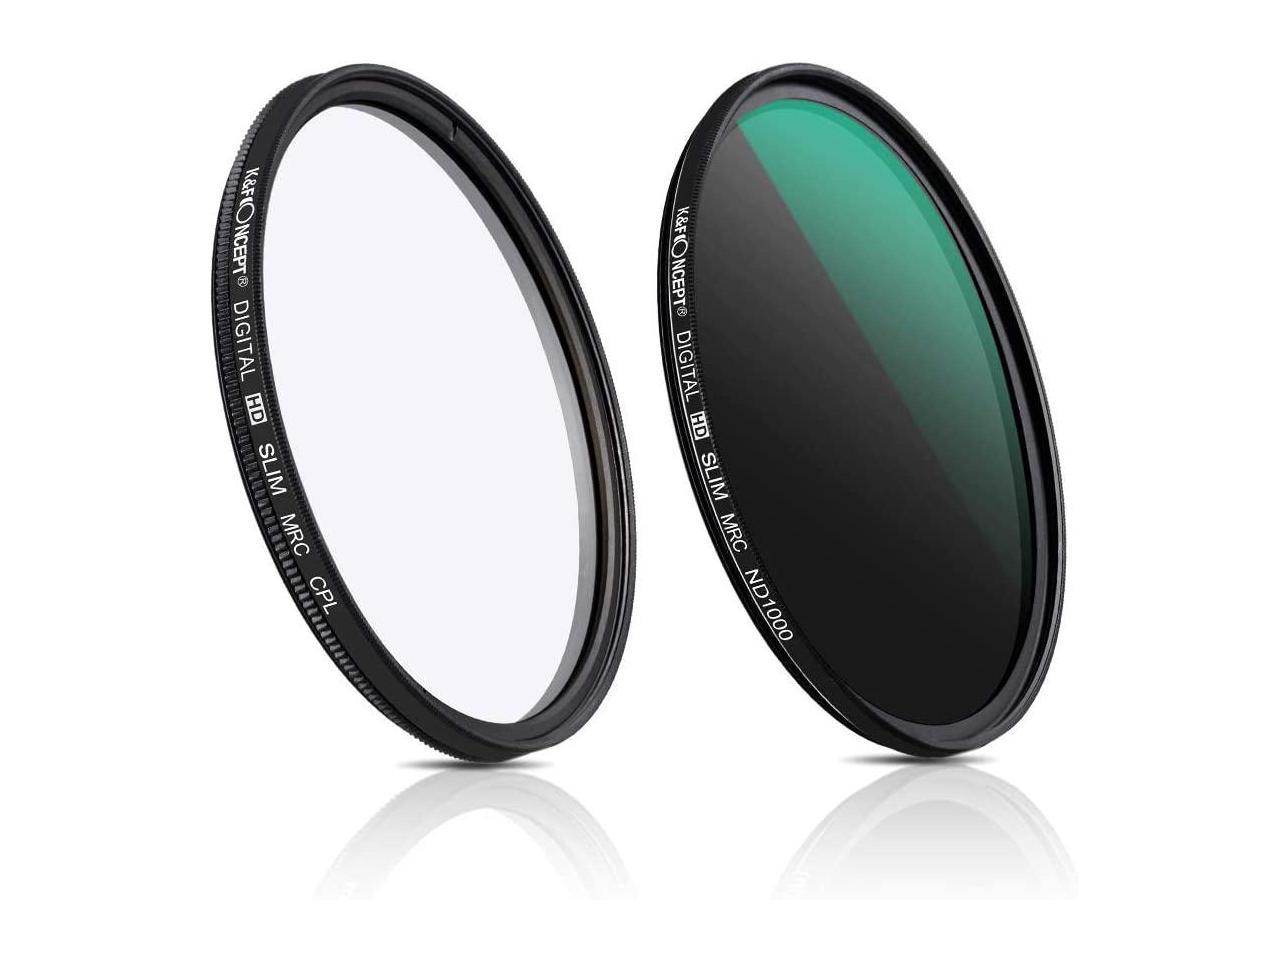 72mm NDX Variable Range Neutral Density Fader Filter Adjustable from ND2 ND1000 for Sony Alpha NEX-5